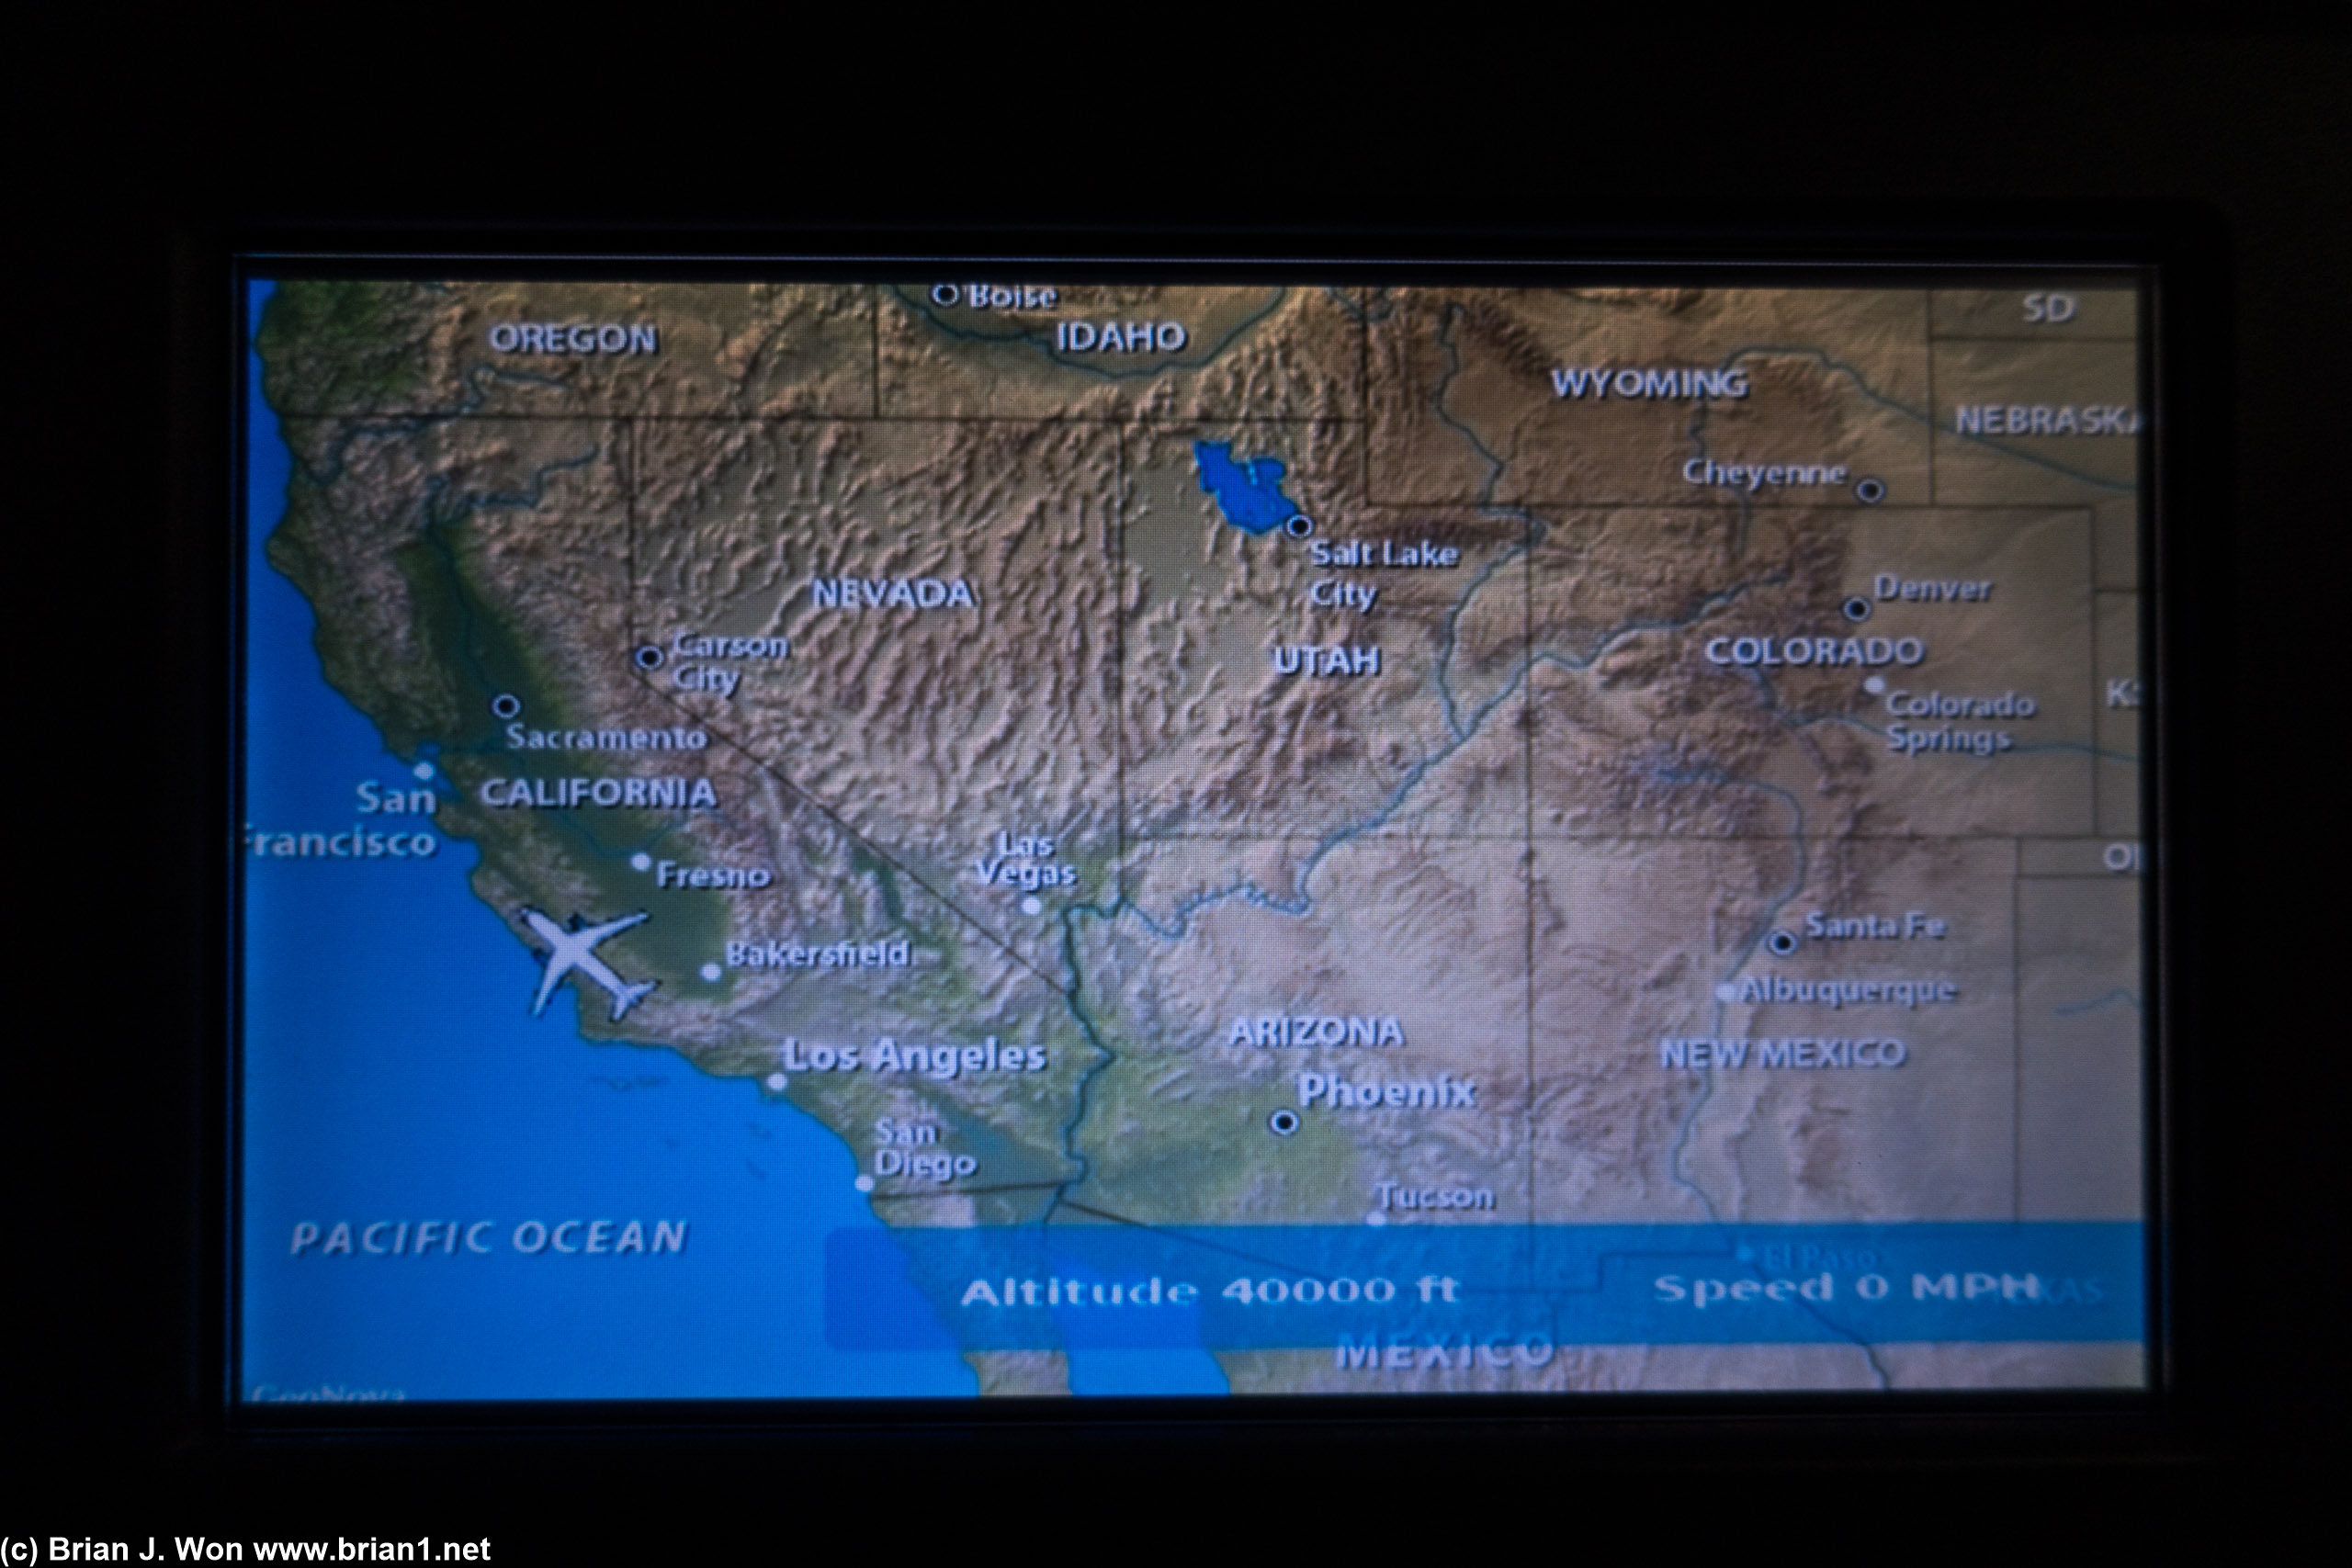 Cruising at 40,000 feet for such a short flight? Maybe because of the atmospheric river?